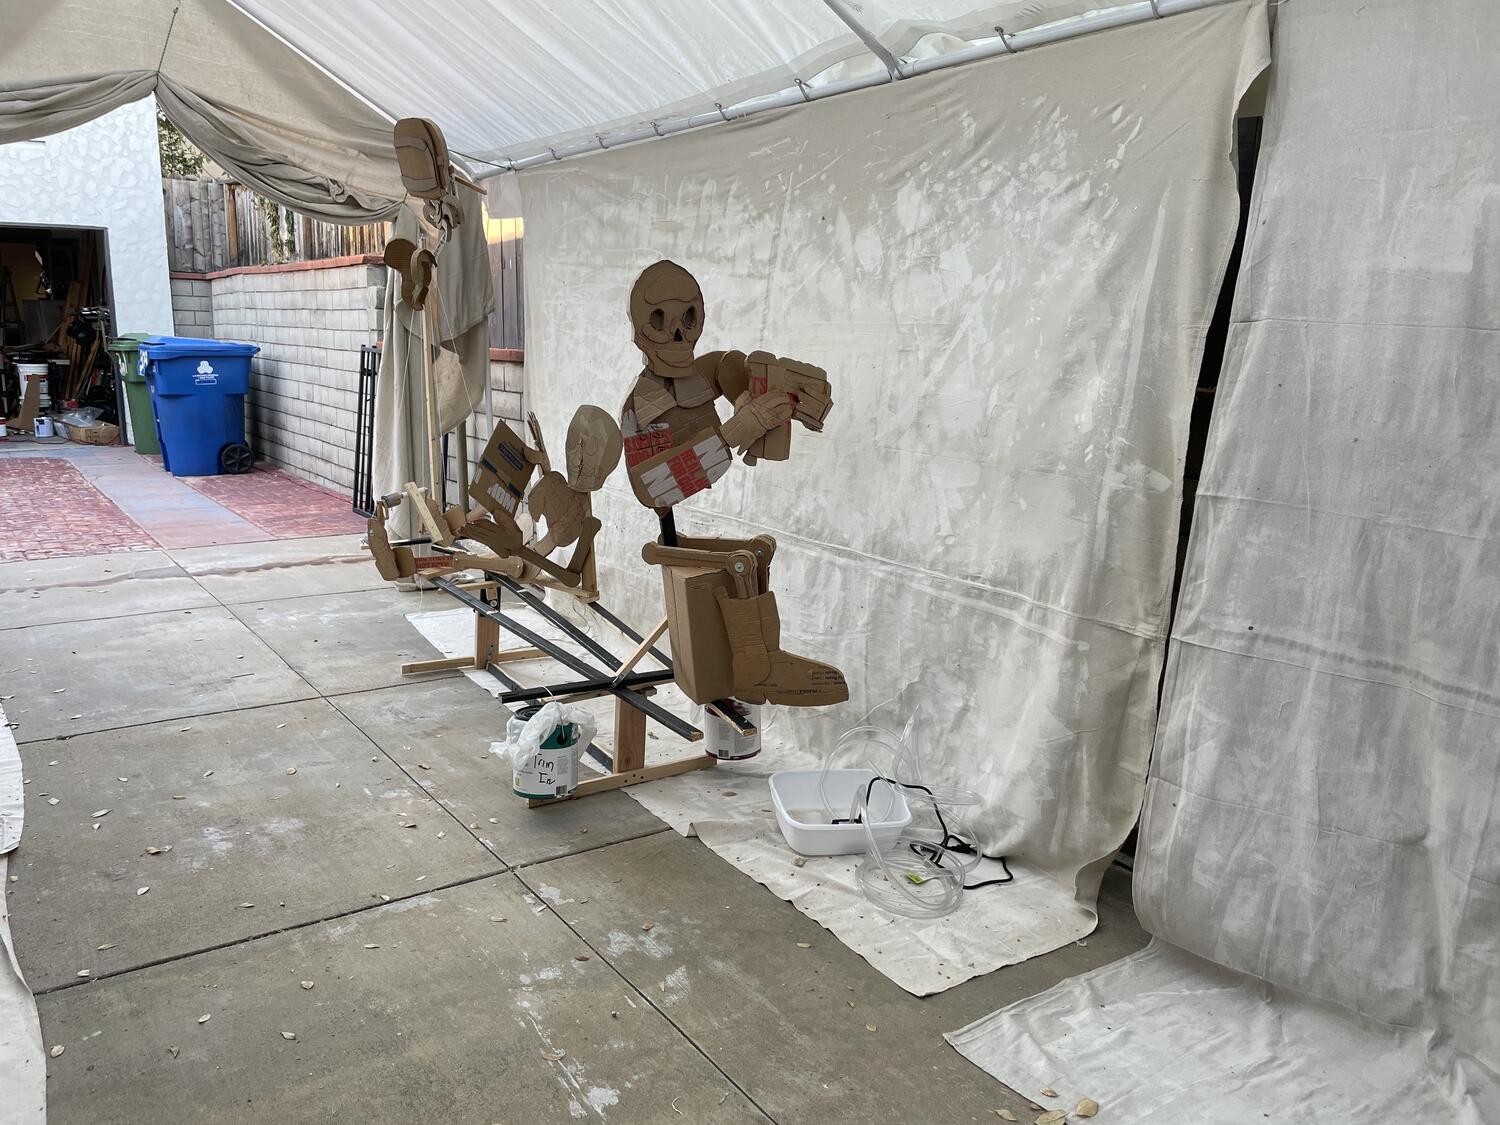 Some unfinished cardboard skeletons sitting under a tent. They're all attached to a wooden frame, and on the ground in front of them is a small plastic basin with tubes coming out of it. A messy garage is just on the edge of the frame in the background.